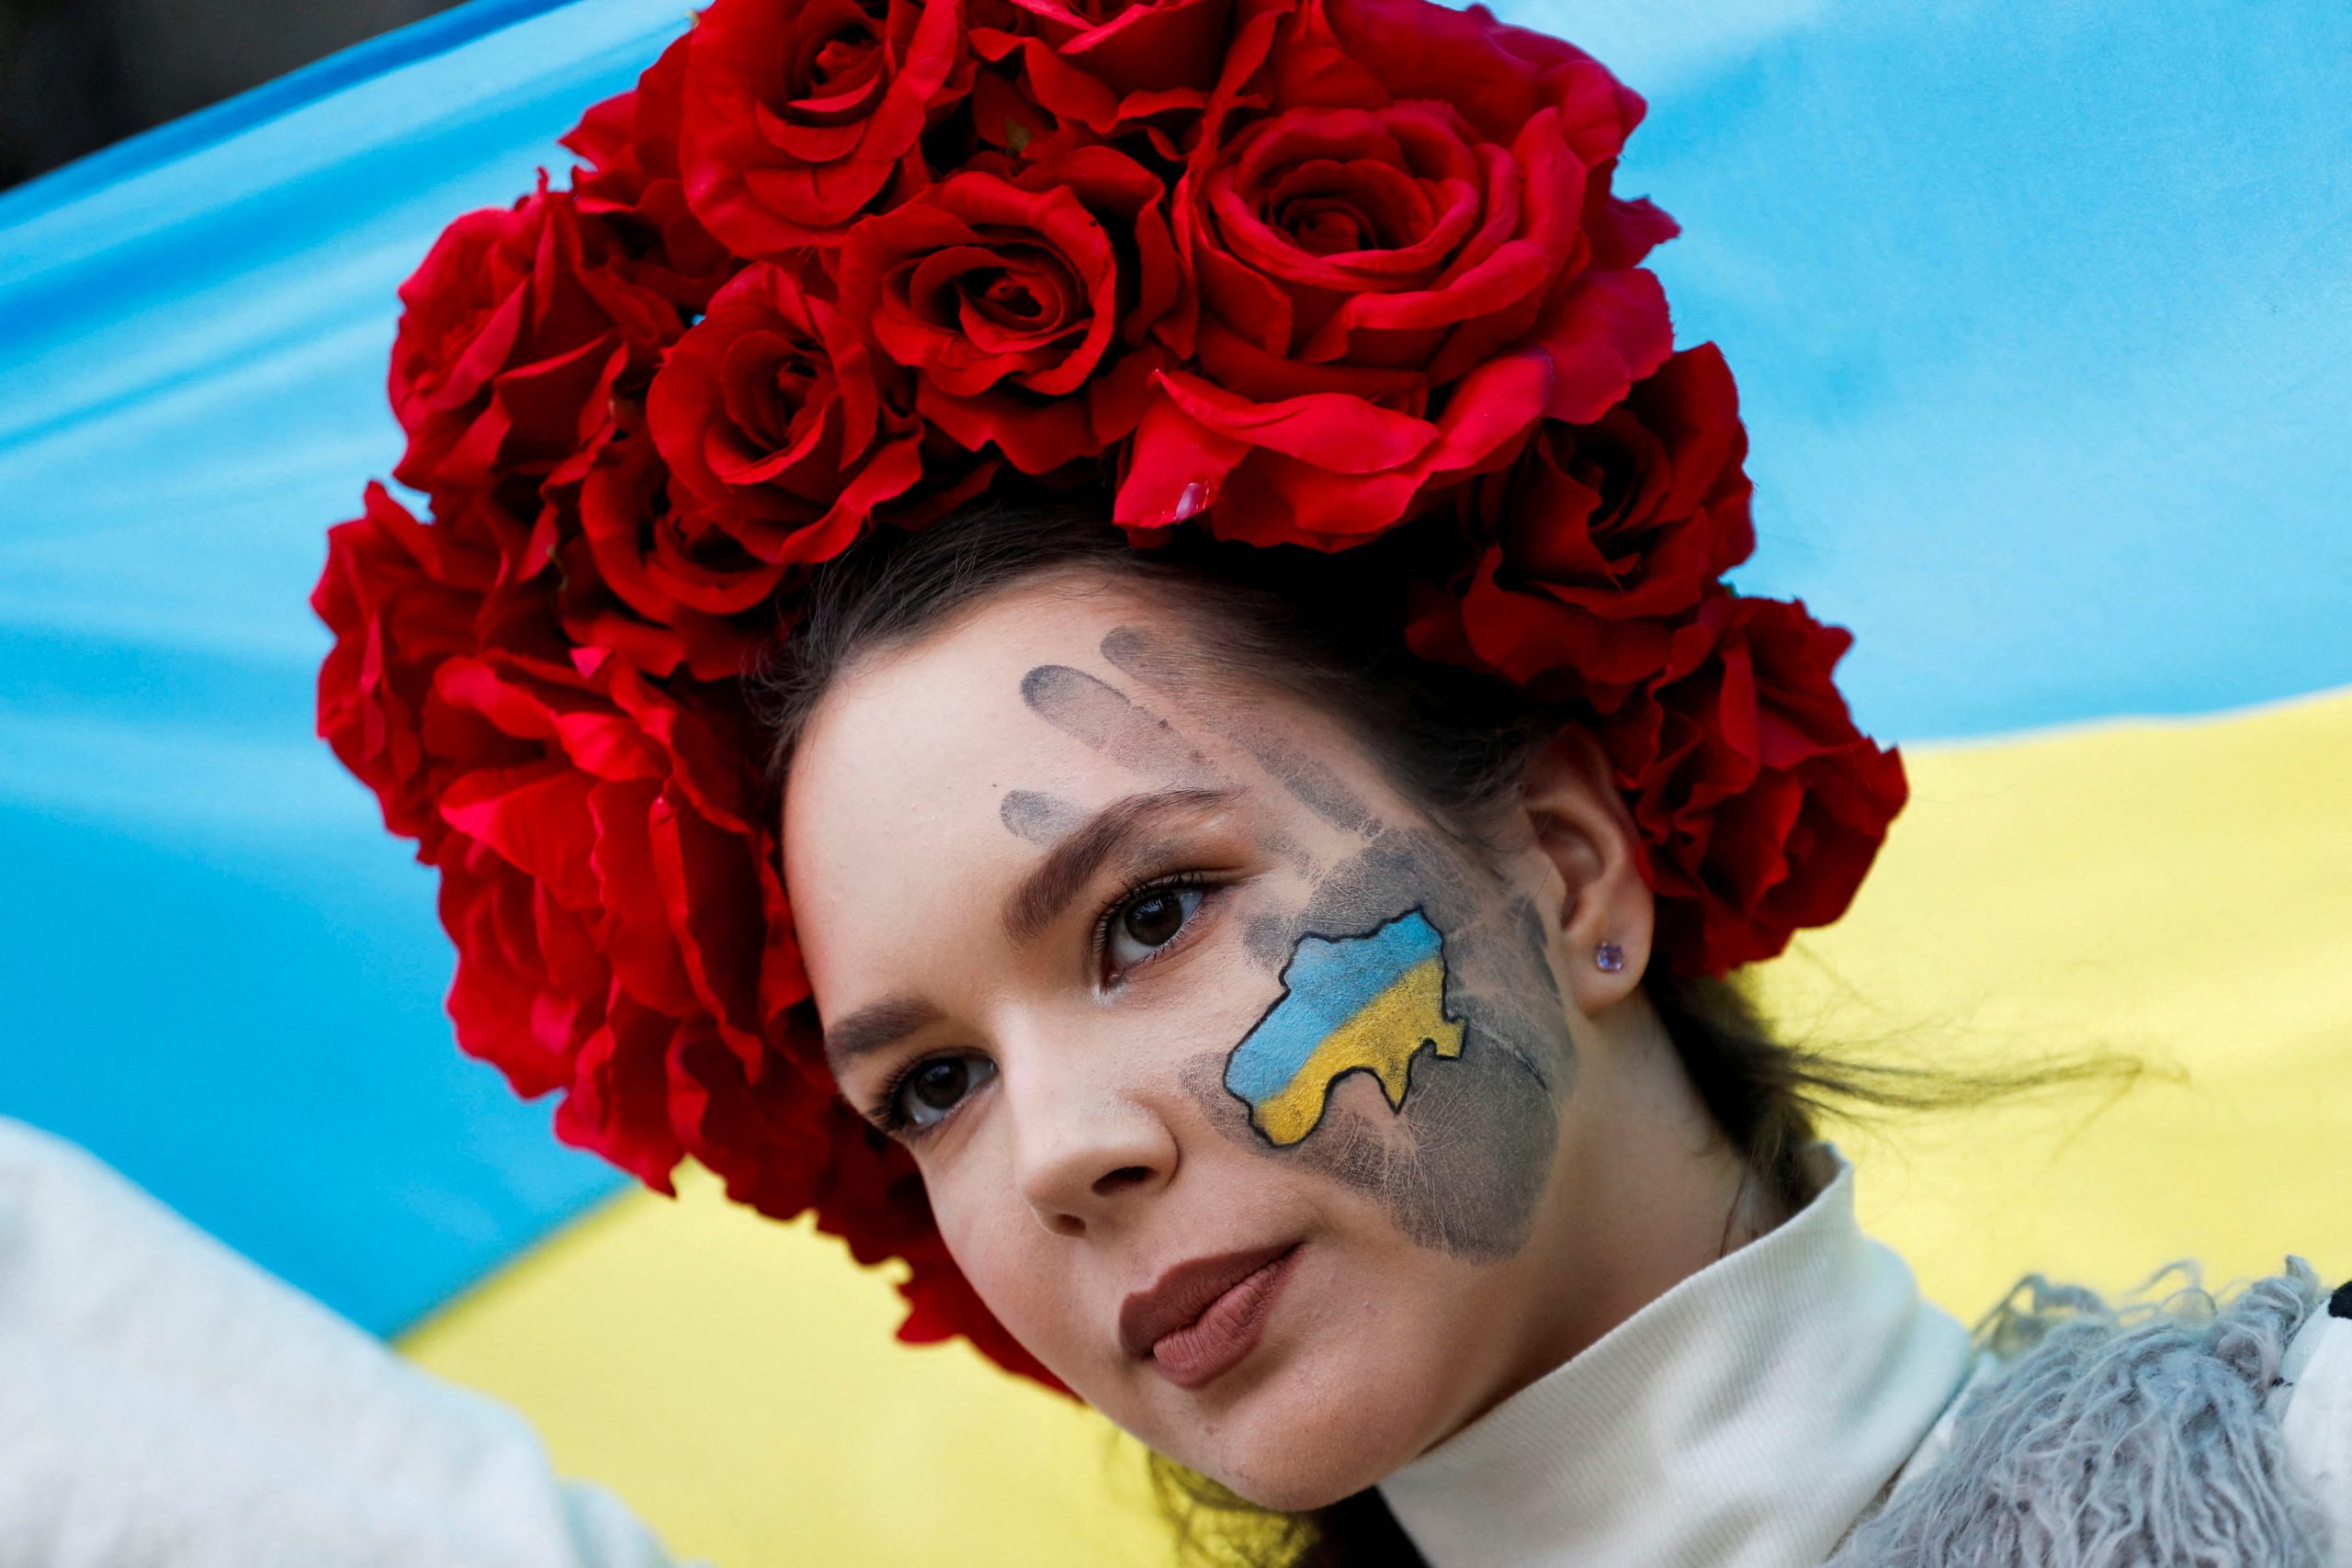 Photo: A Ukrainian woman takes part in a solidarity march to mark the first anniversary of the Russian invasion of Ukraine, in Budapest, Hungary, February 24, 2023. Credit: REUTERS/Bernadett Szabo